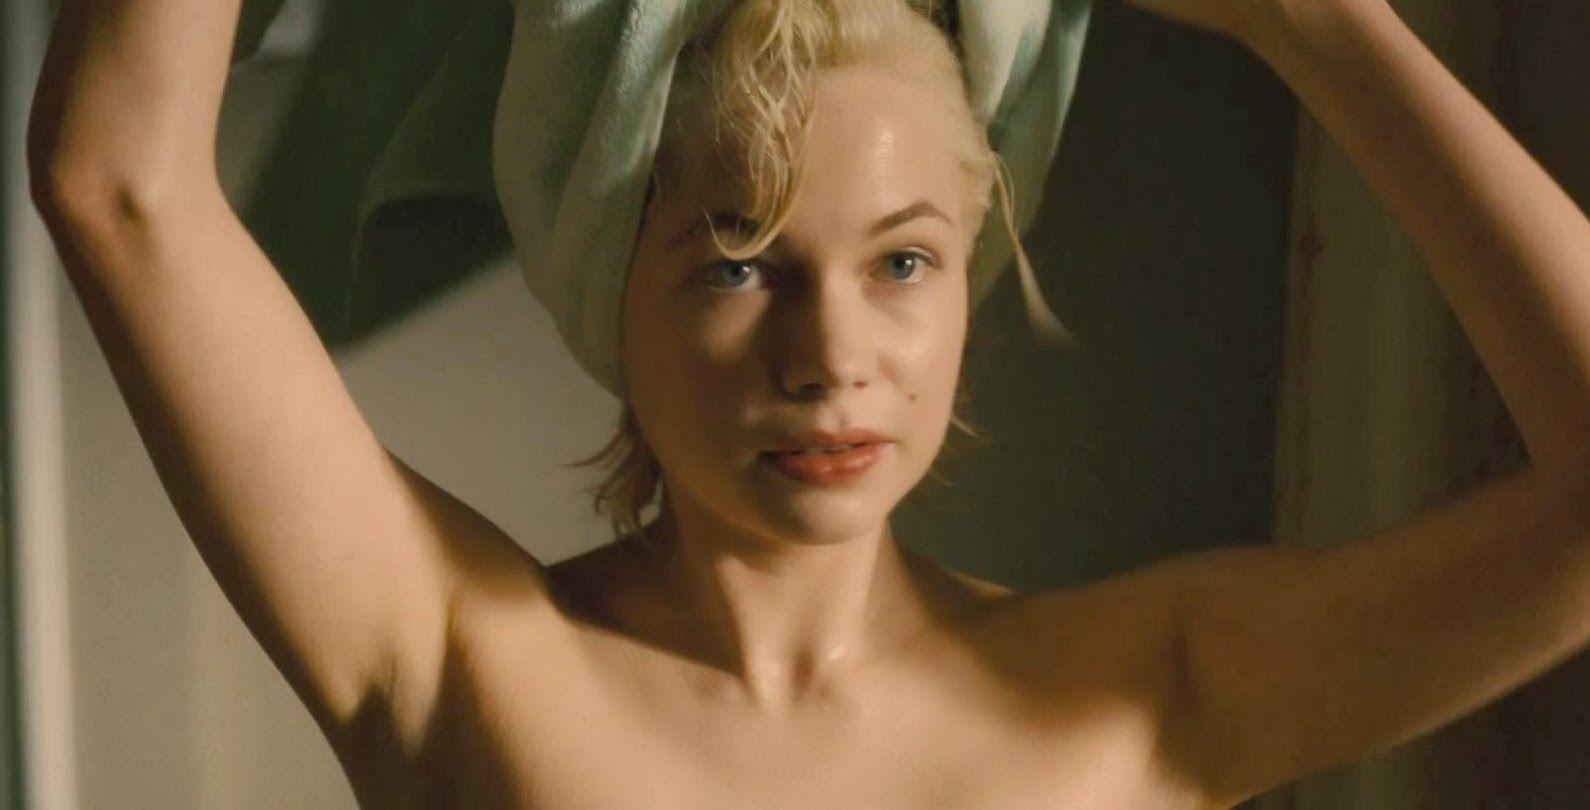 Michelle williams actress nud